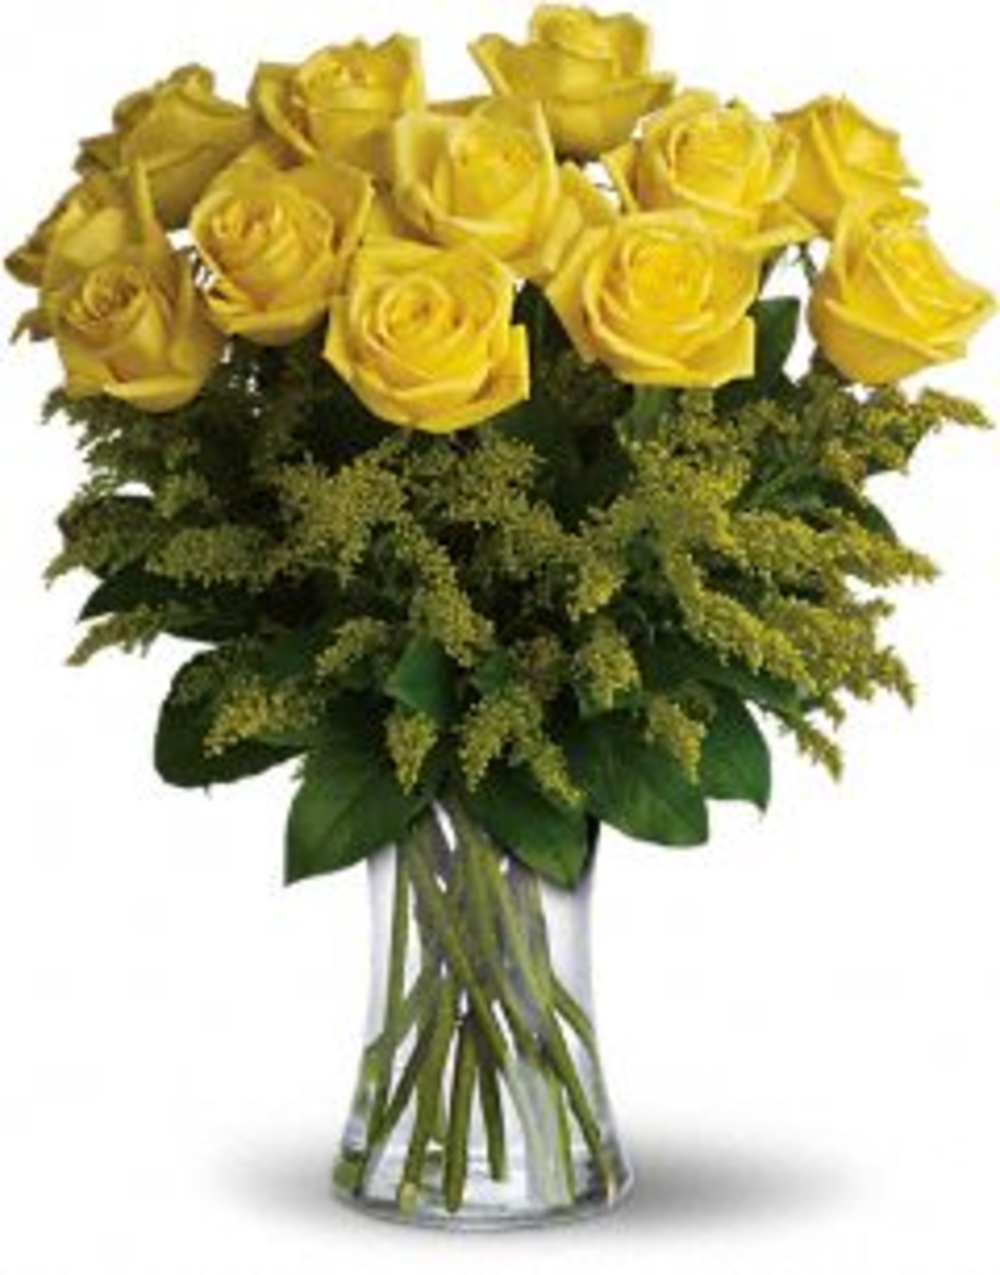 Vase with Yellow Roses.